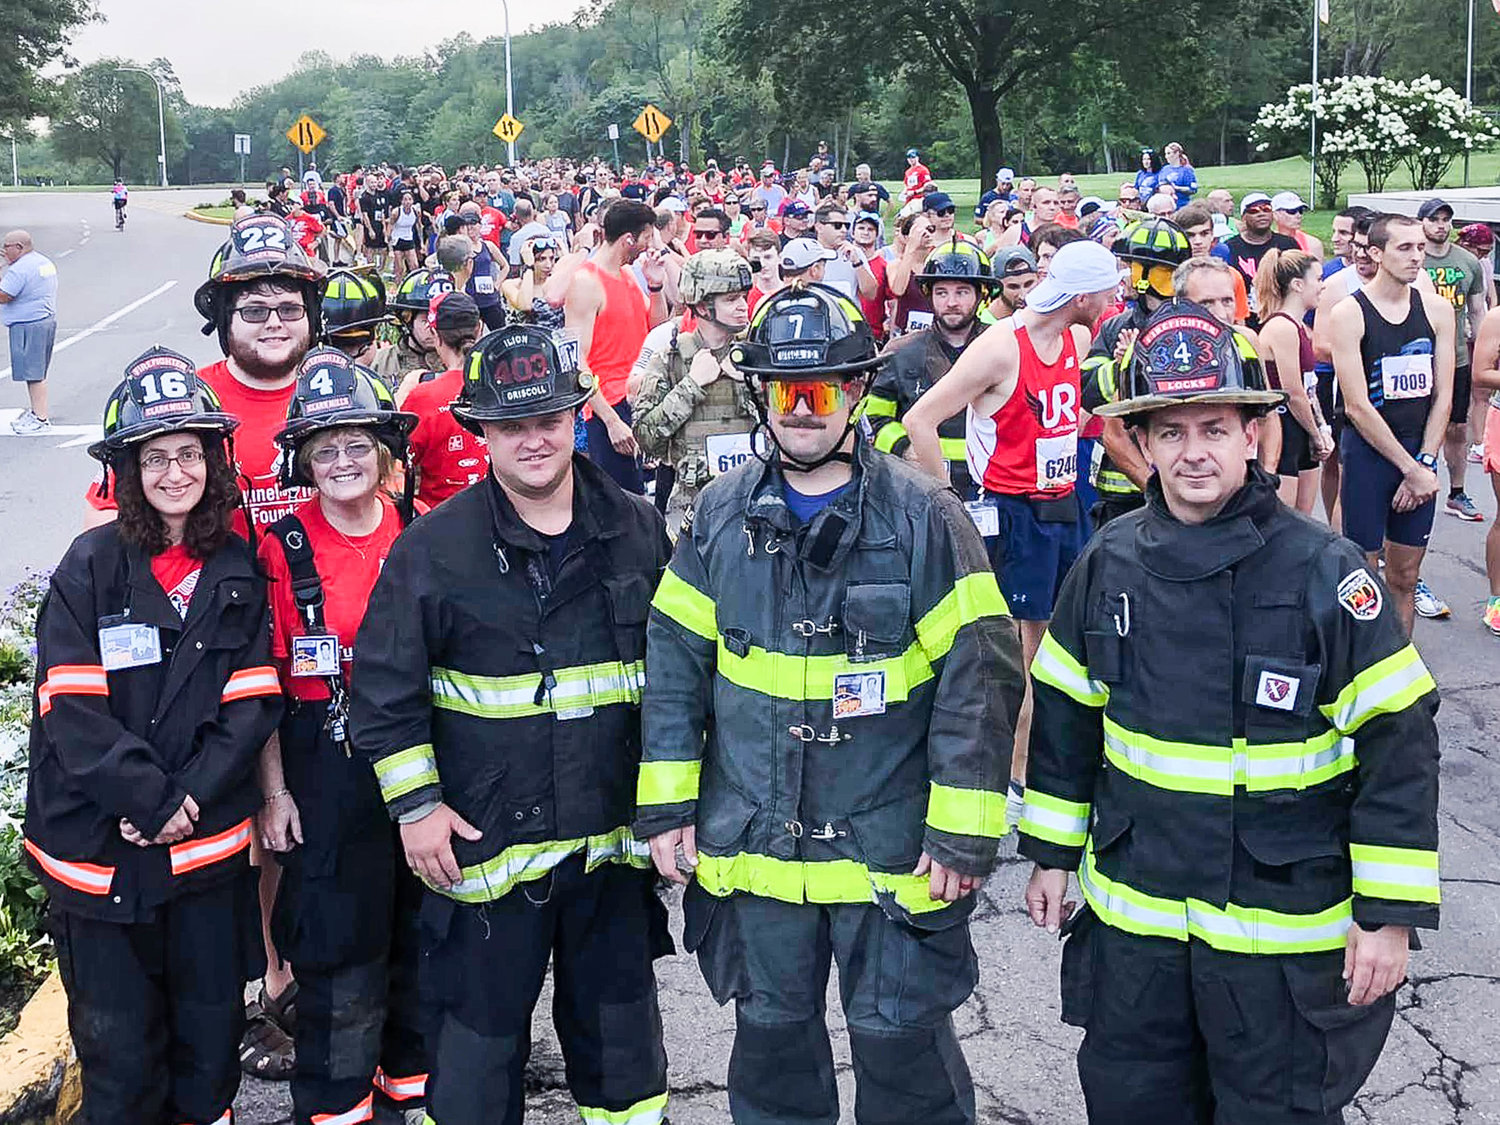 Participant’s at the starting line of last year’s Tunnel to Towers Run/Walk.